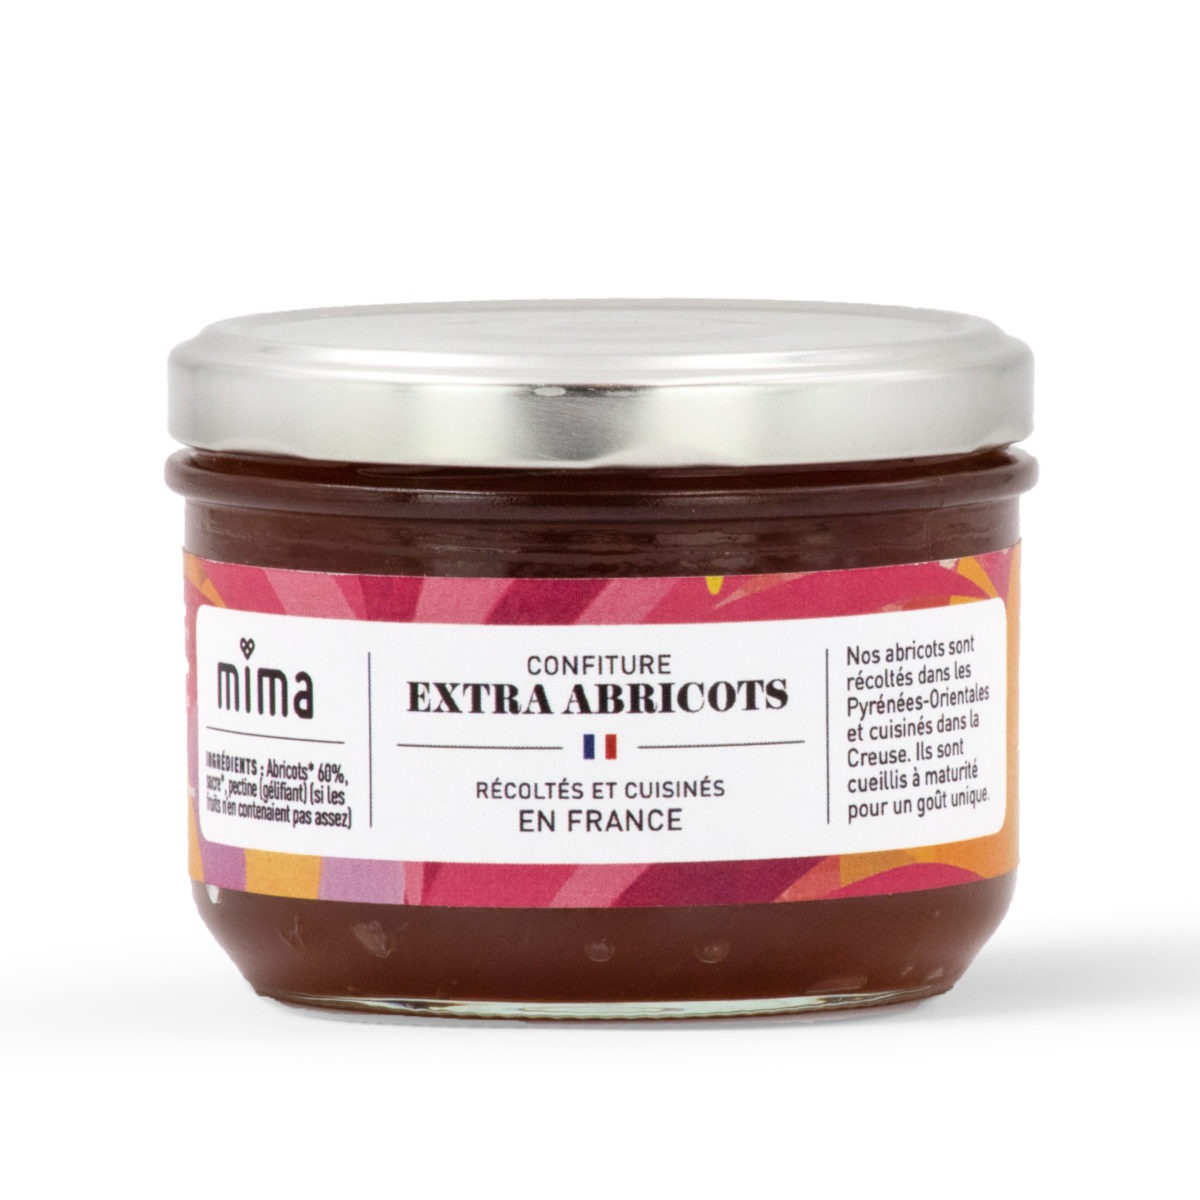 Confiture extra abricots 250g